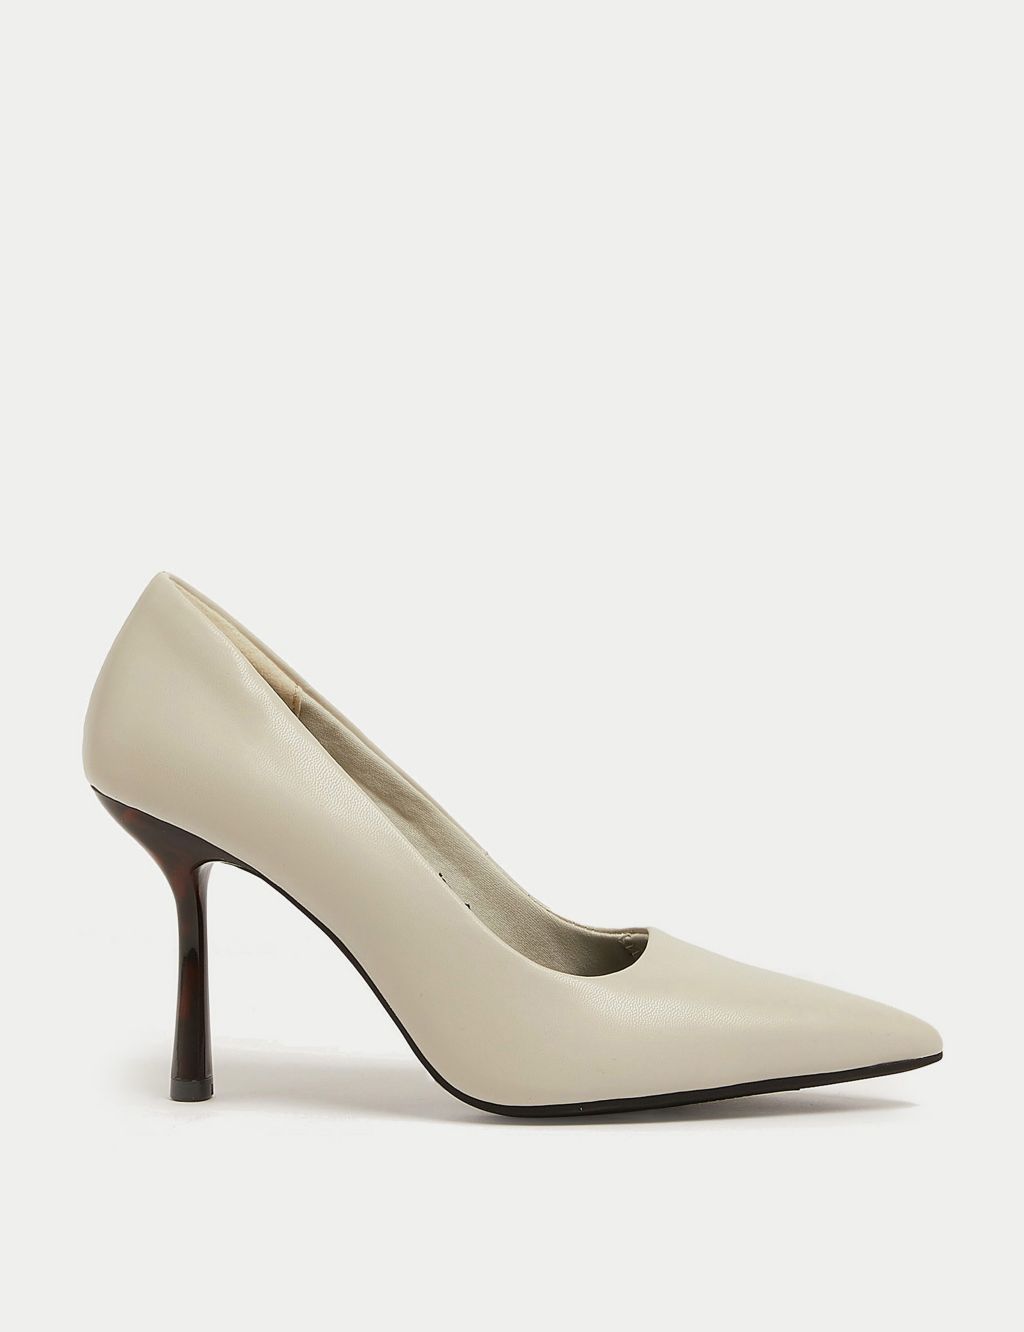 Statement Pointed Court Shoes image 1